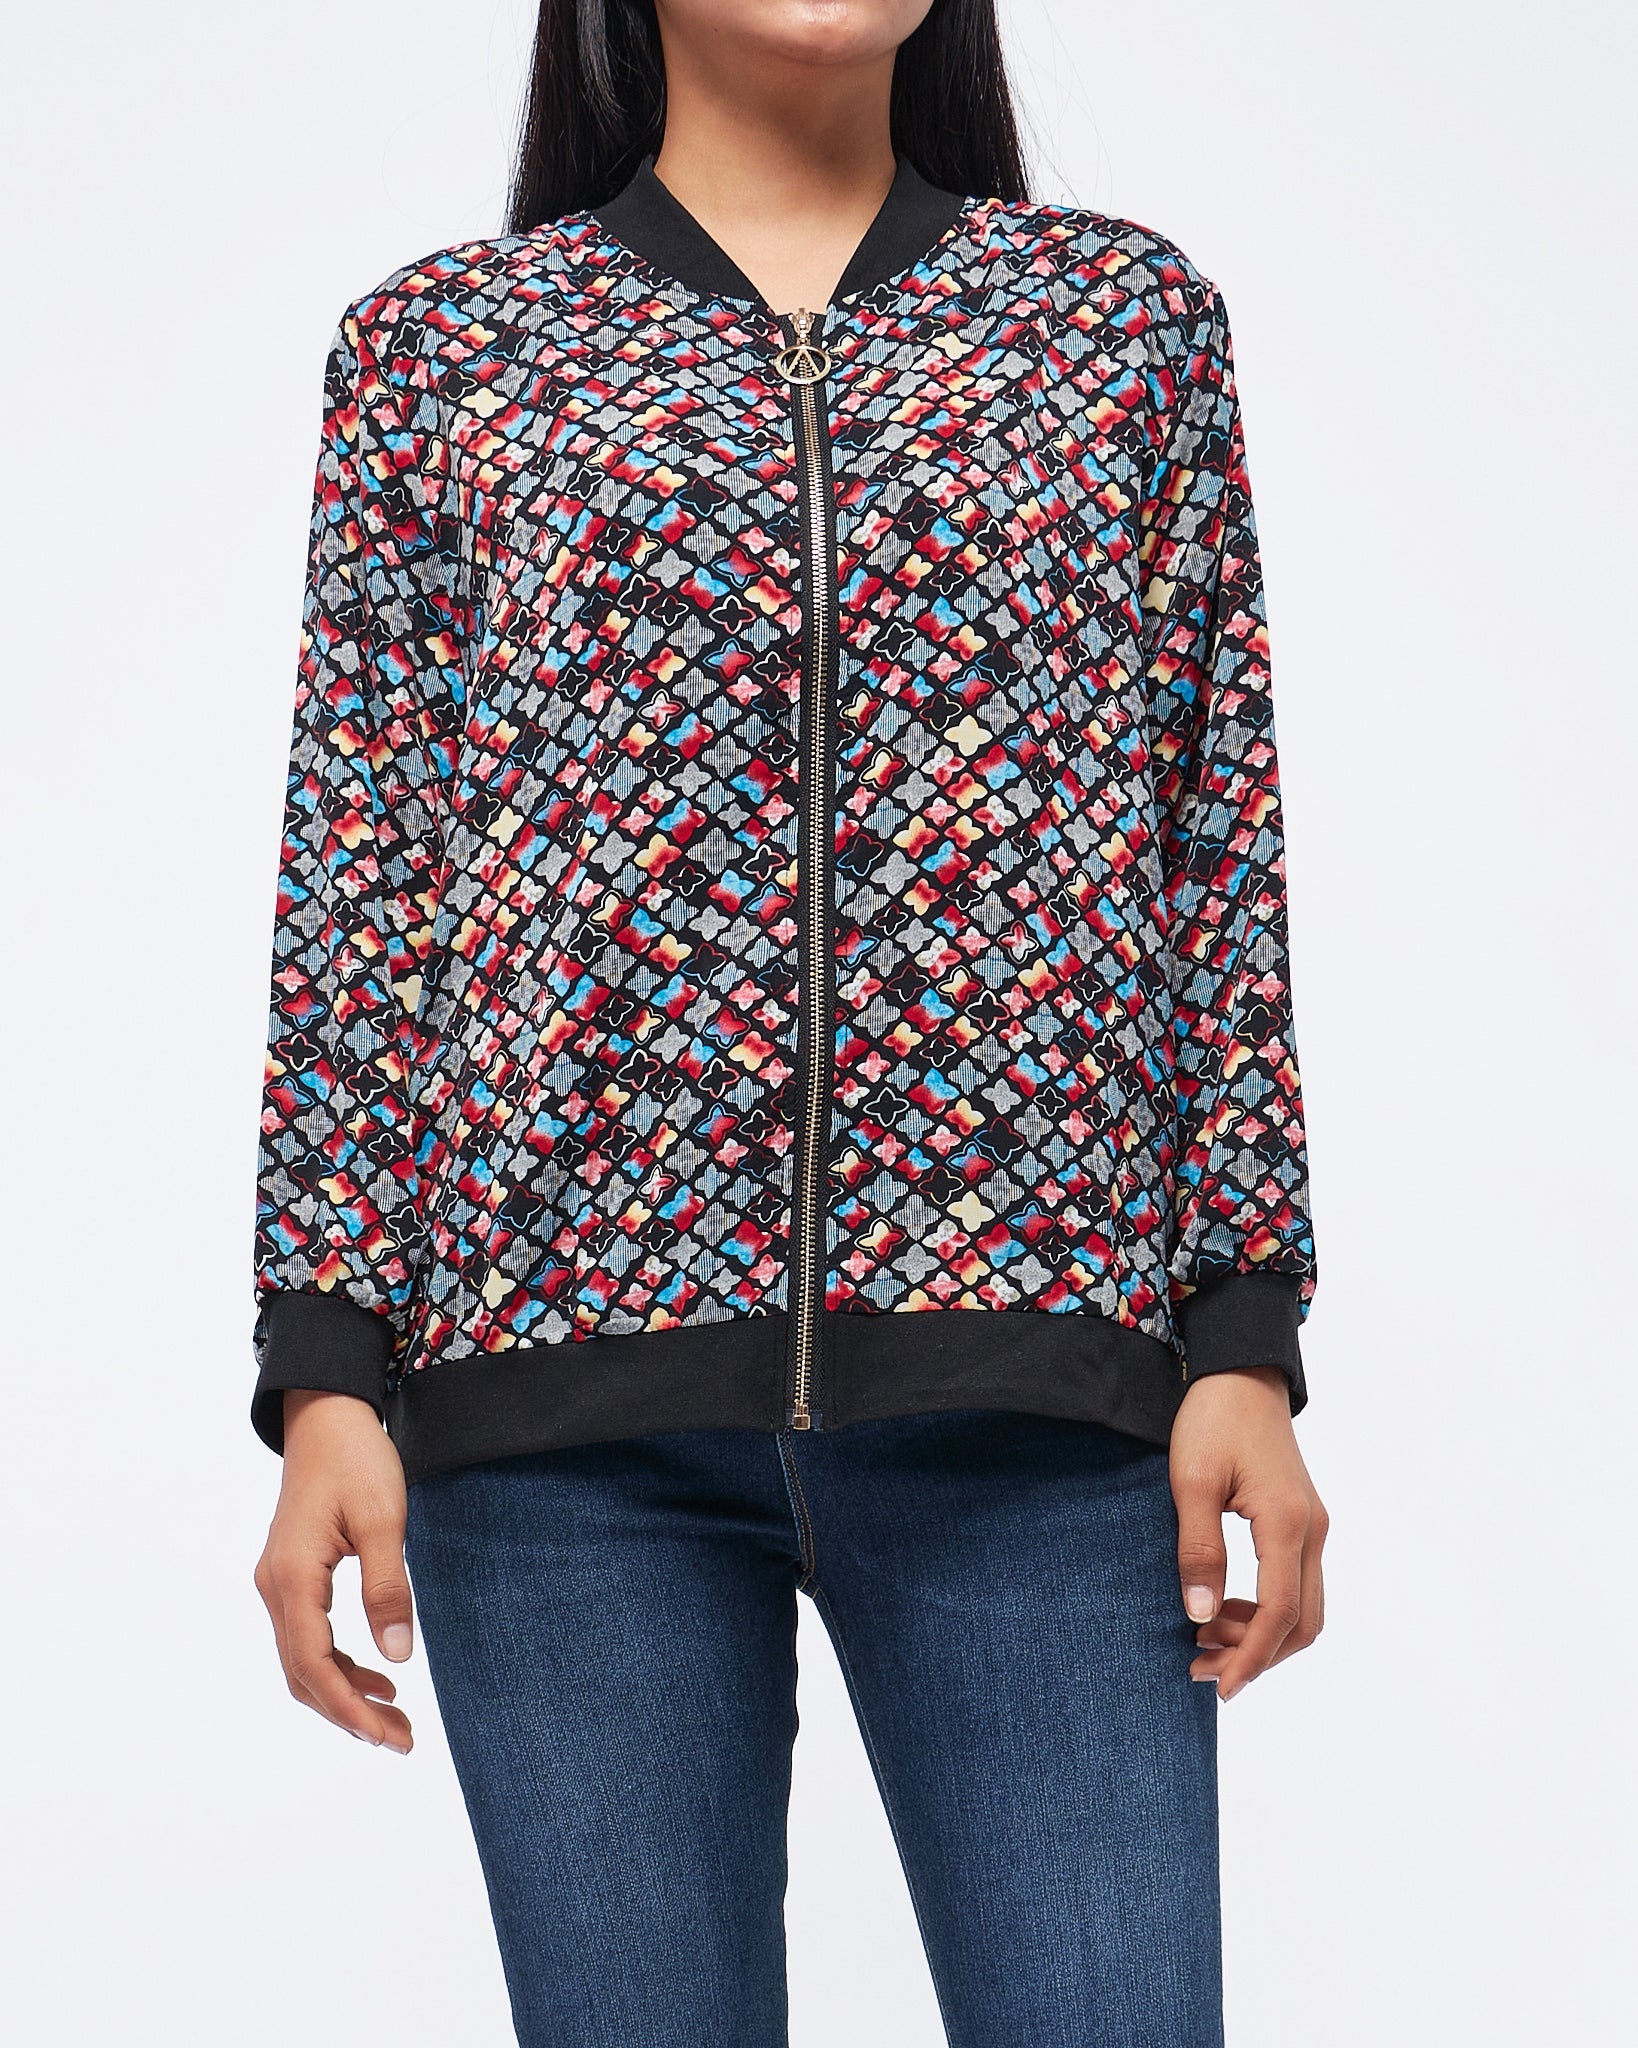 MOI OUTFIT-Monogram Over Printed Lady Jacket 17.90